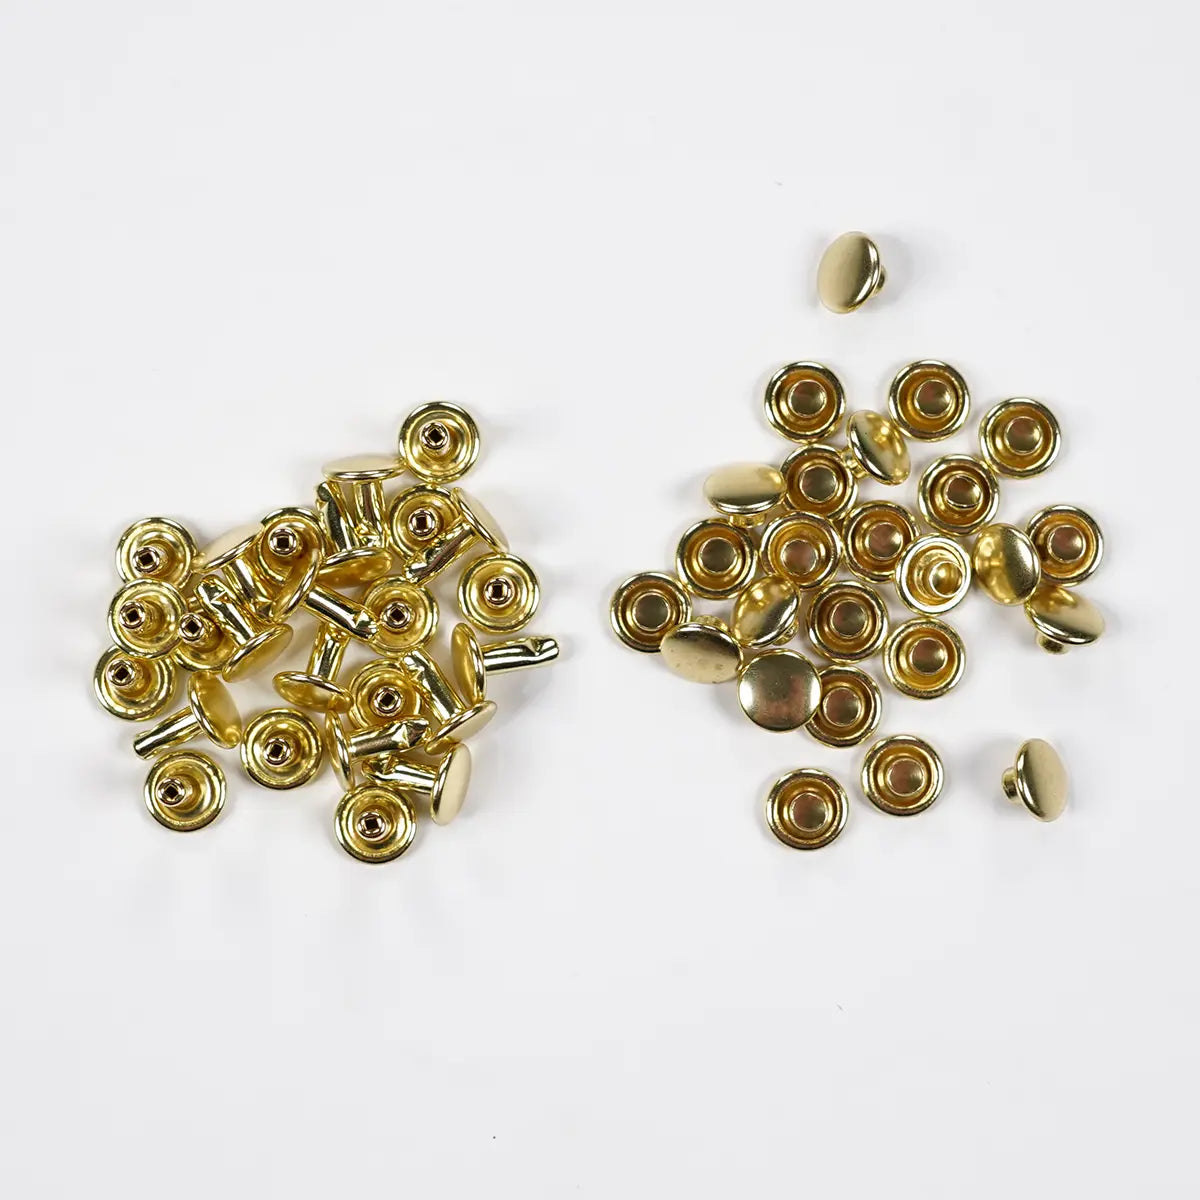 7mm x 7.9mm Solid Brass Double Cap Rivets 25 Pack